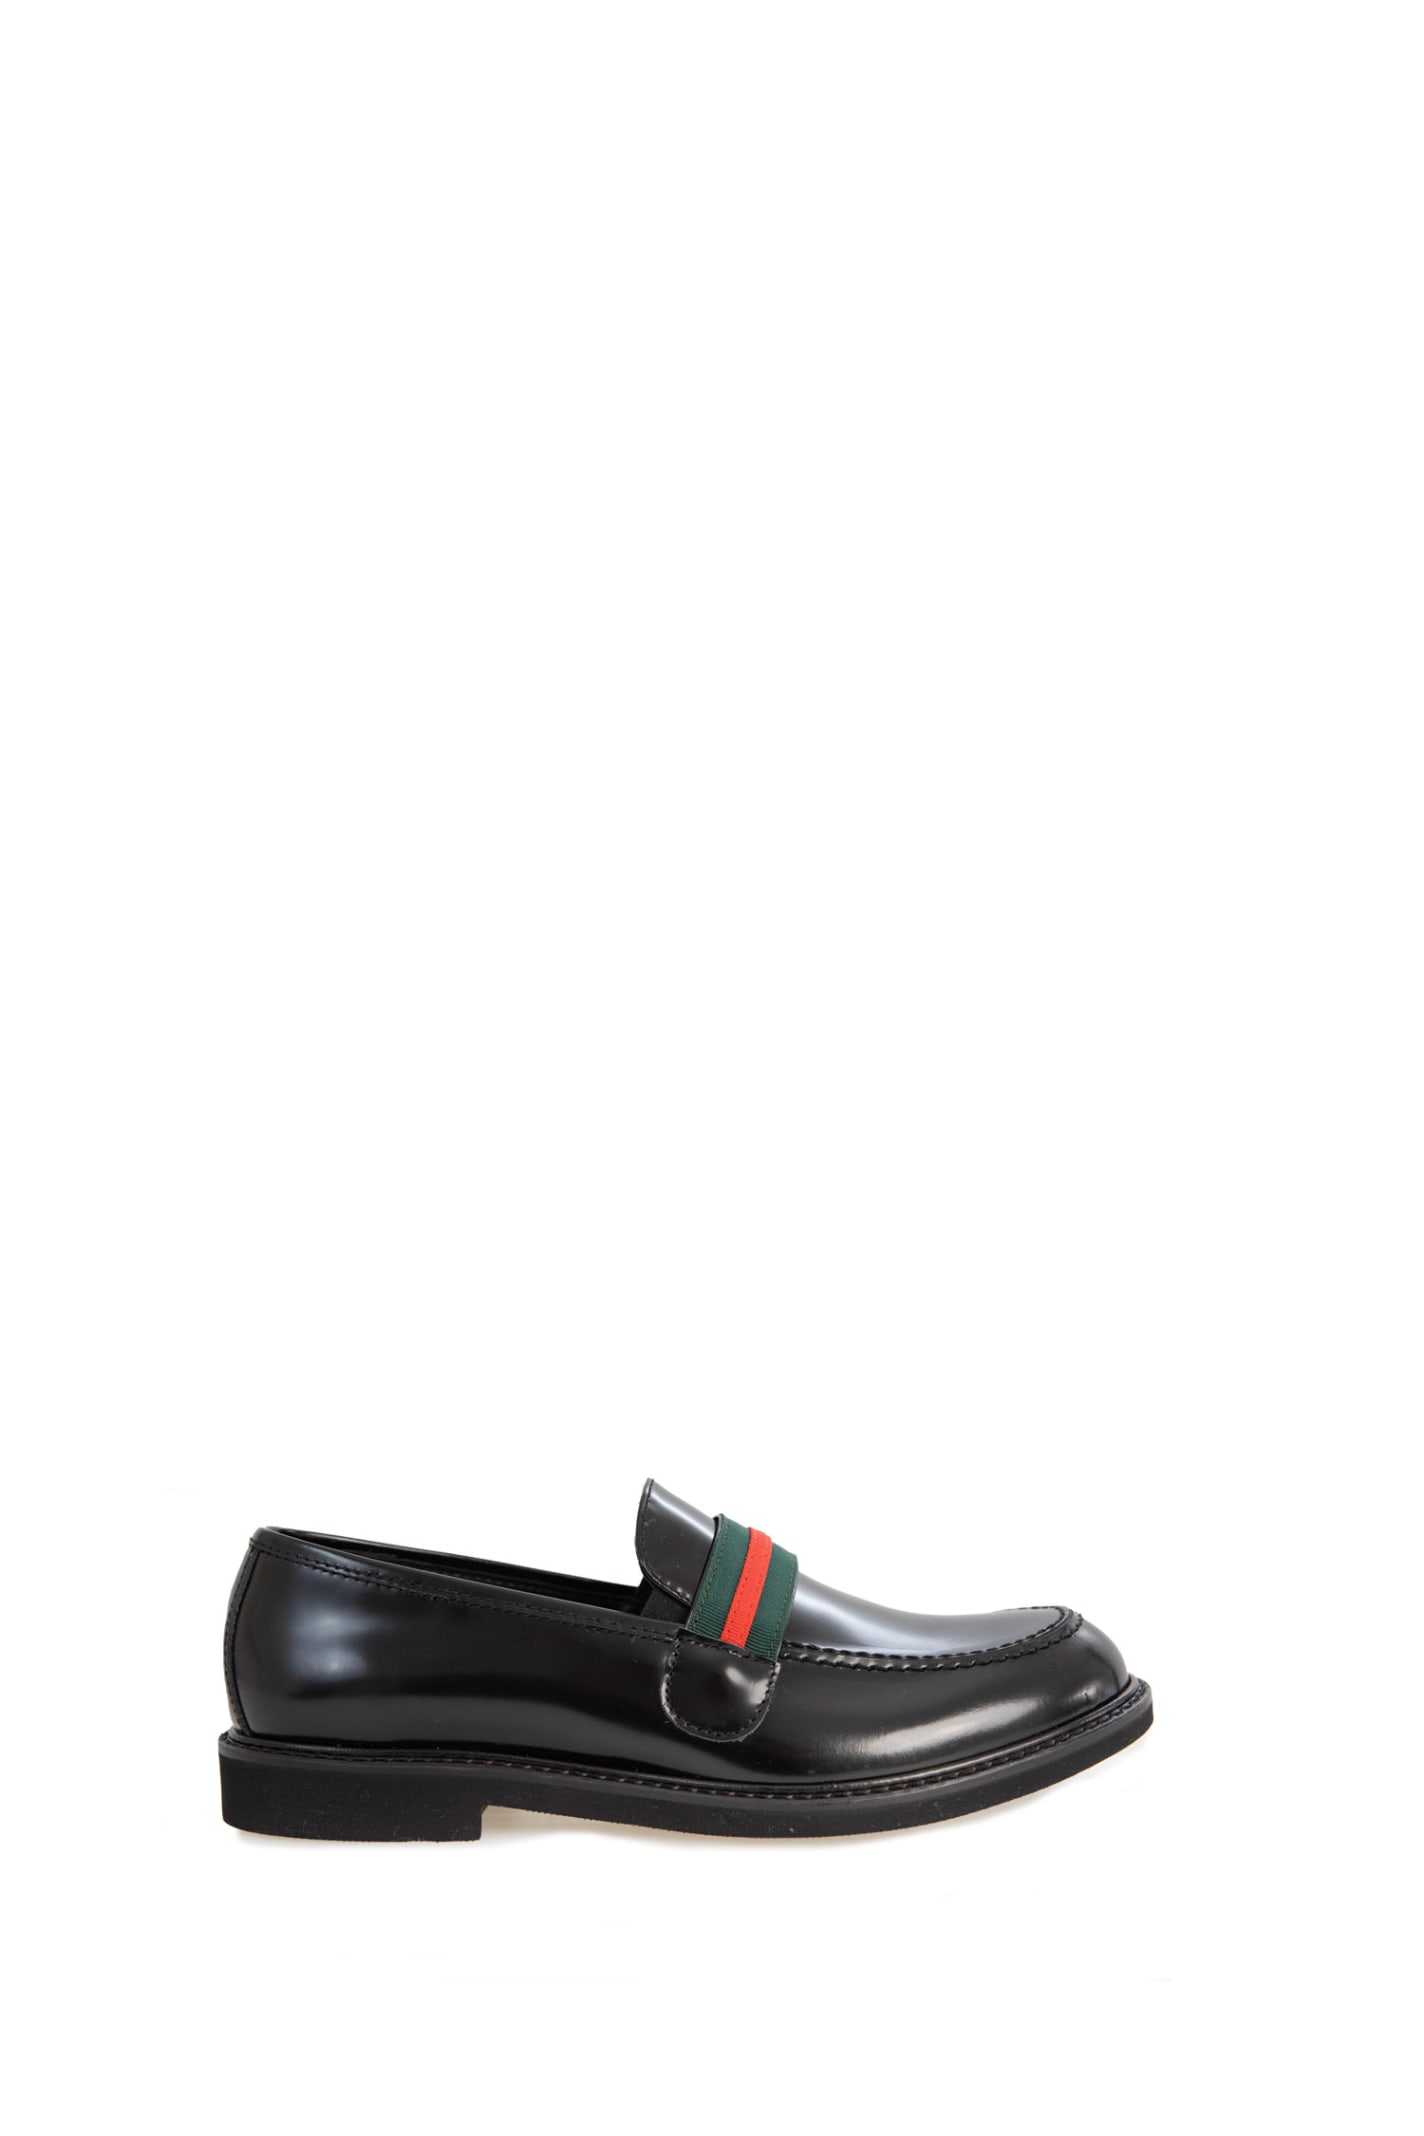 Andrea Montelpare Kids' Leather Loafers